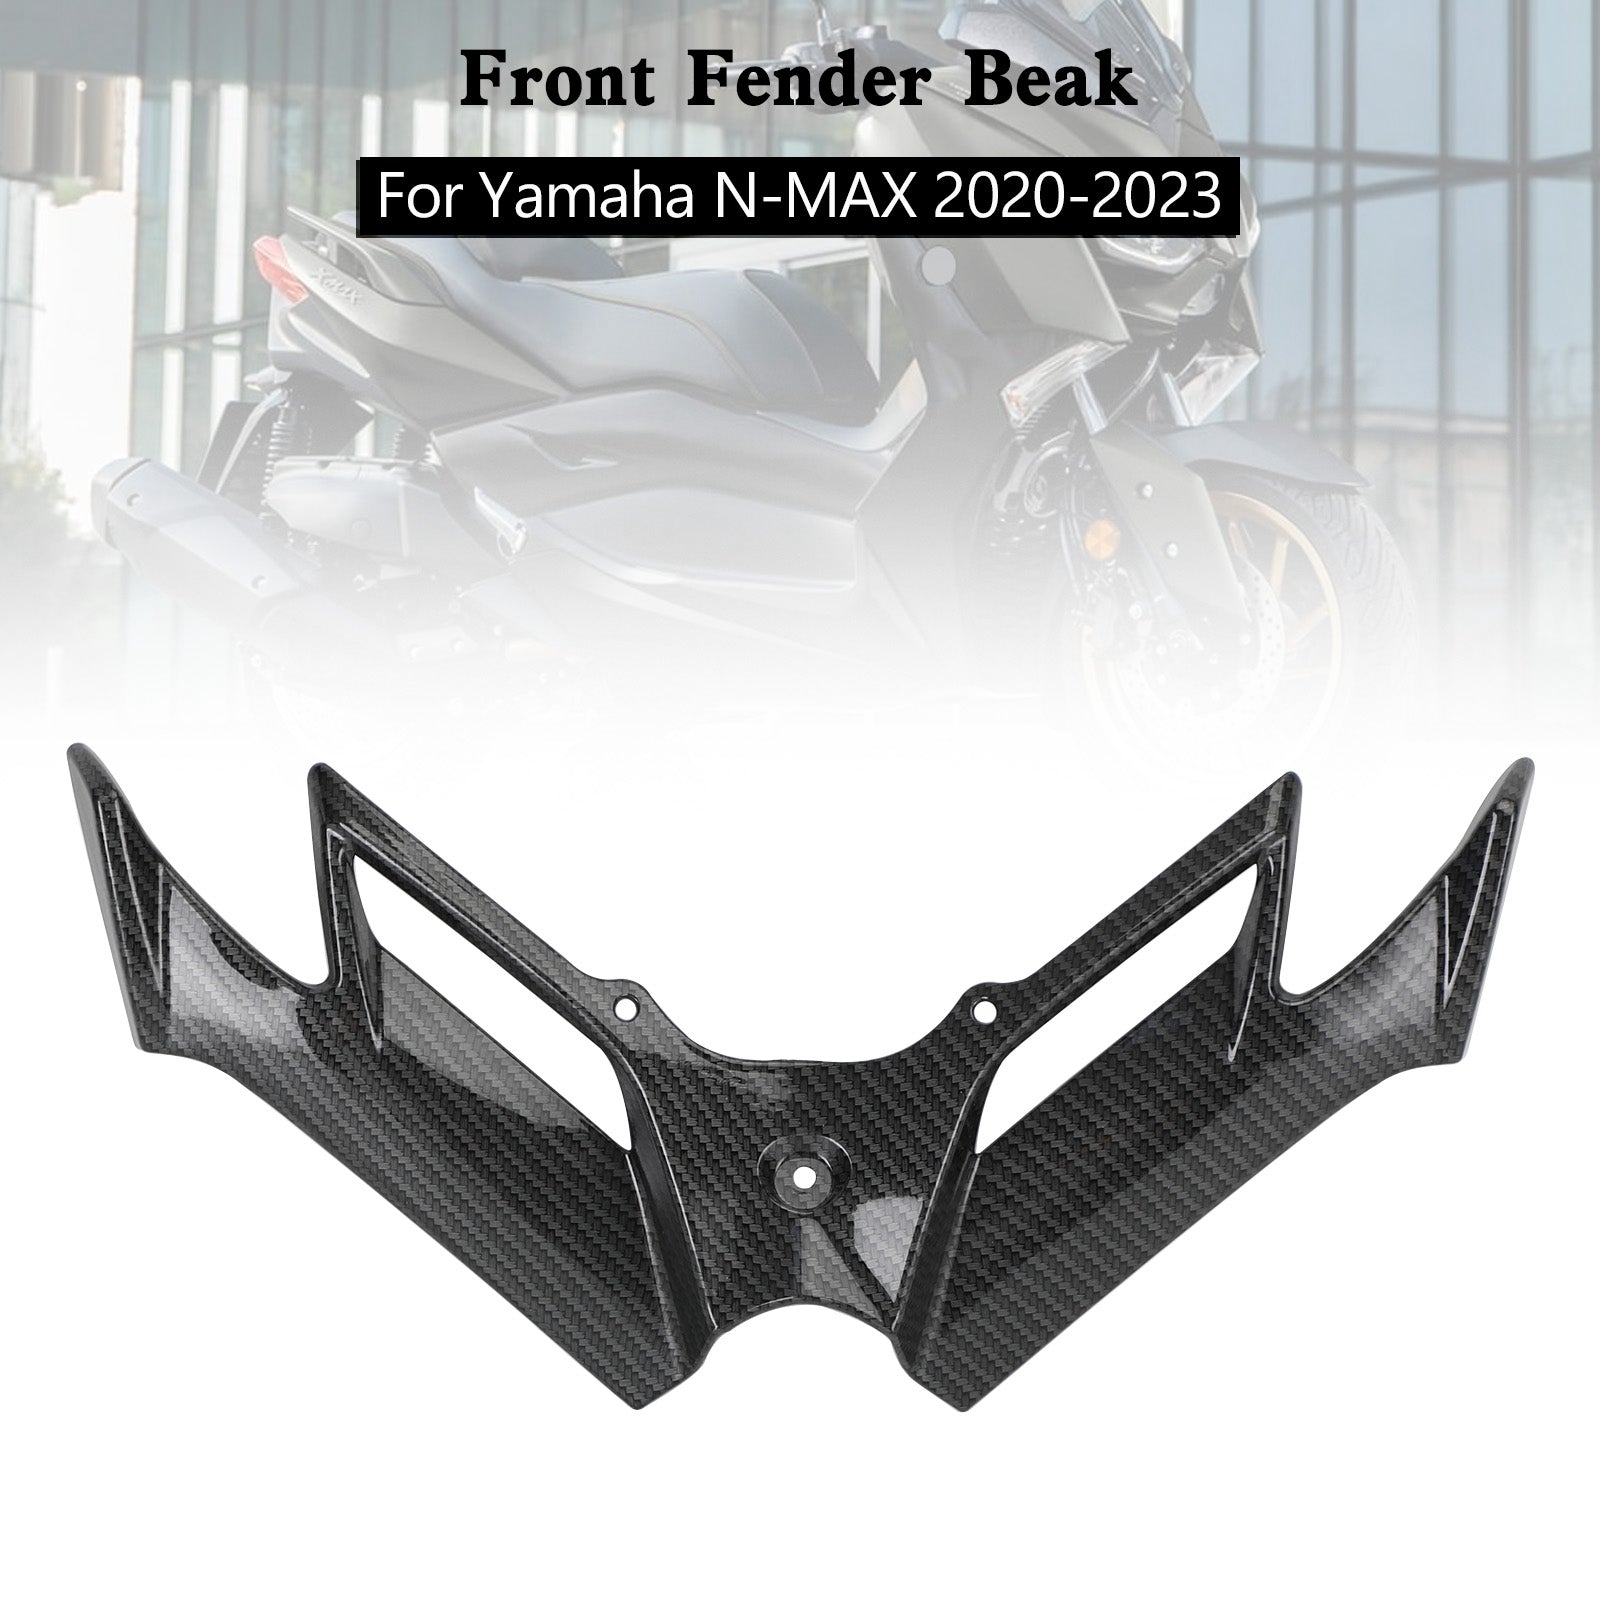 Front Fender Beak Nose Cone Extension For Yamaha N-MAX NMAX 2020-2023